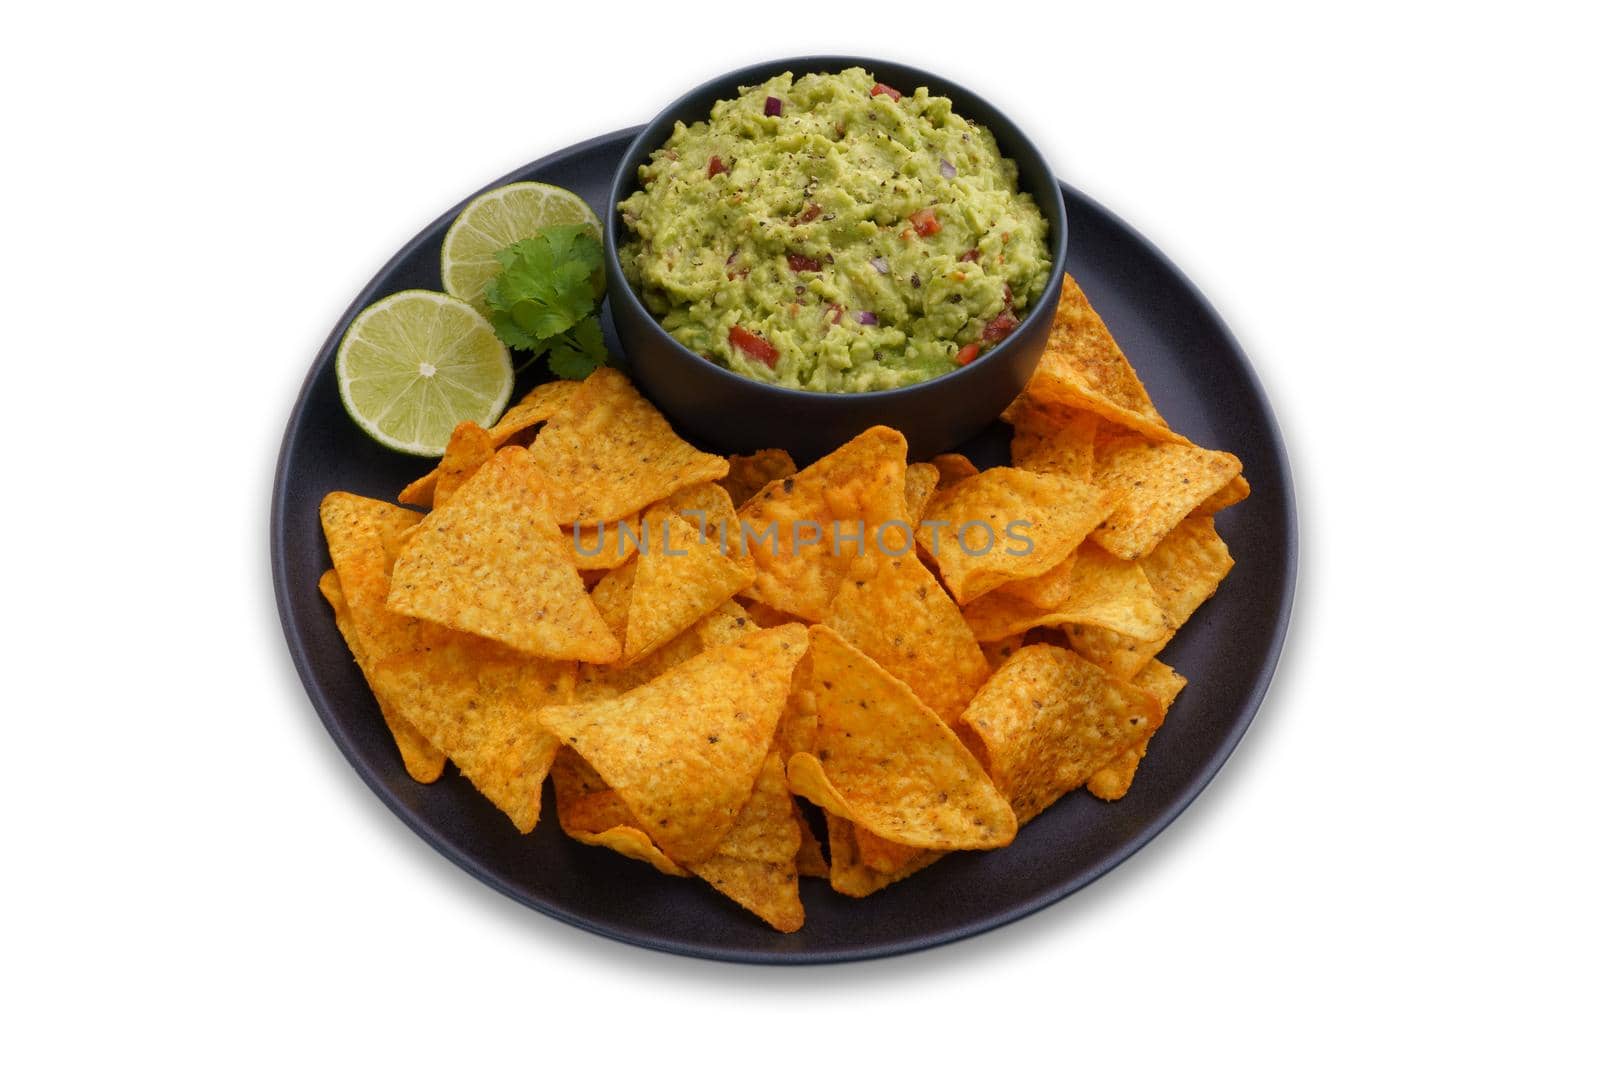 Black plate of guacamole dip and tortilla chips or nachos isolated on a white background. High quality photo